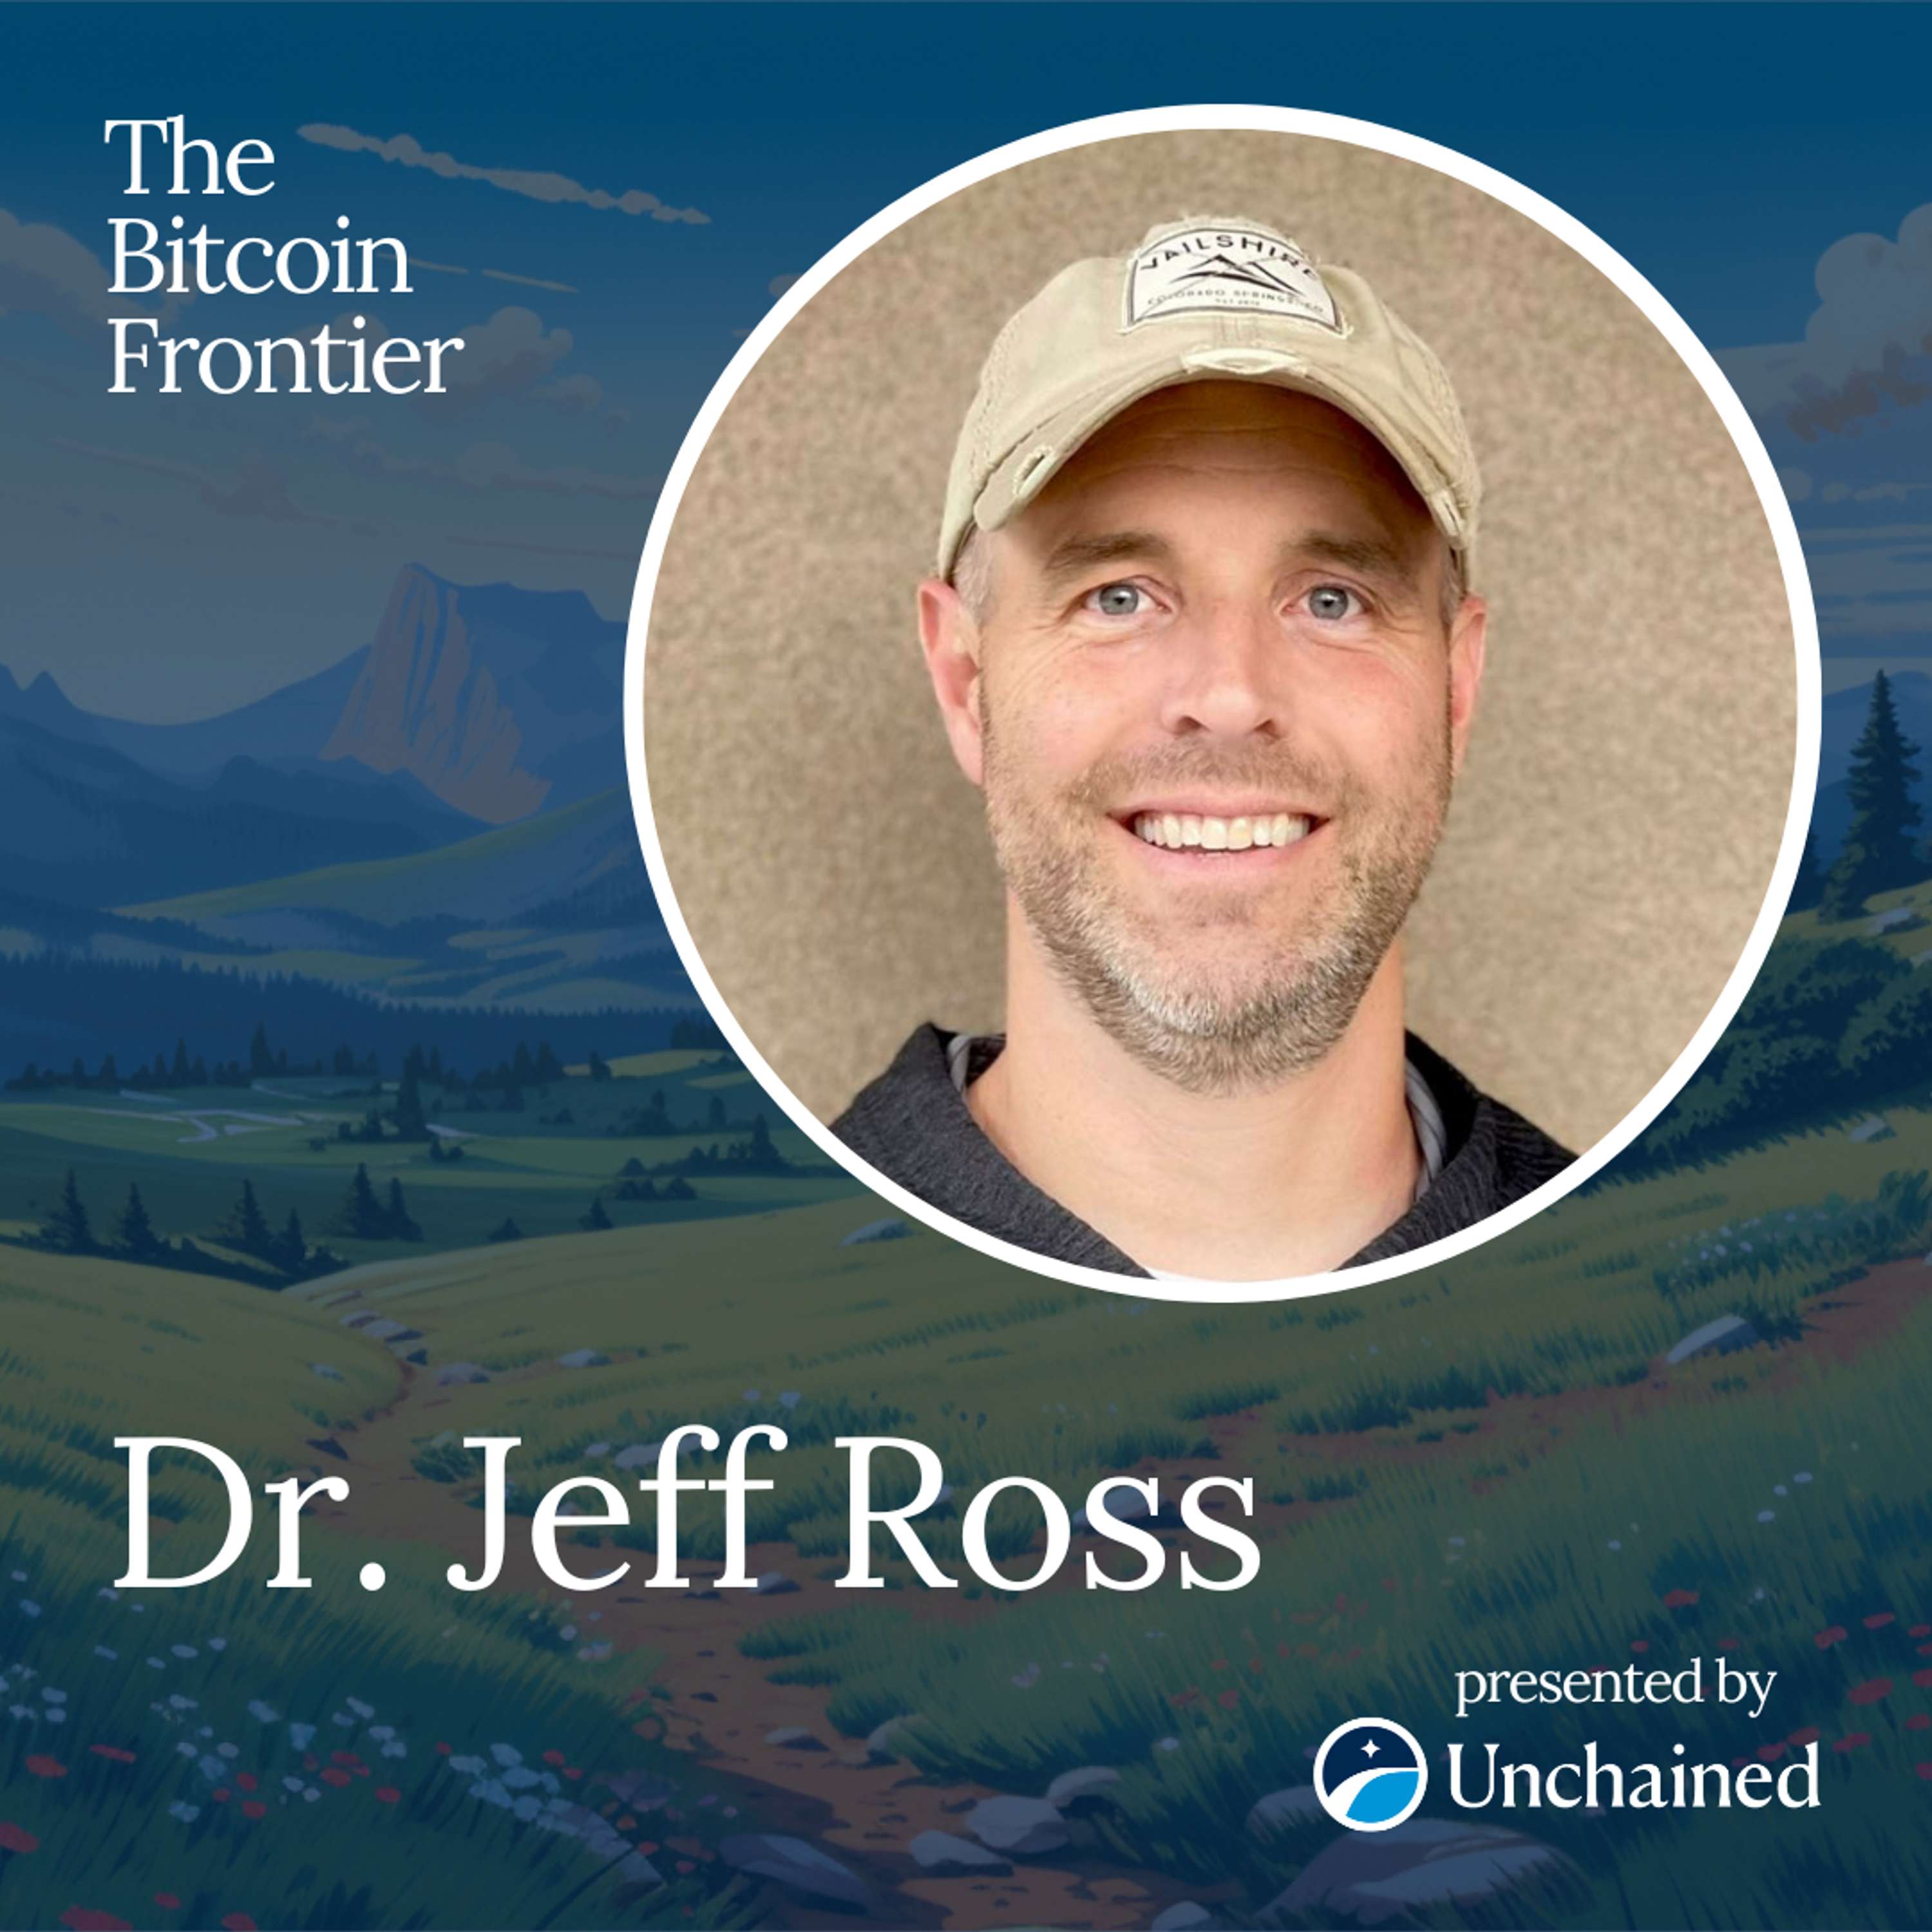 Exponential growth, power laws, and bitcoin portfolio management with Dr. Jeff Ross